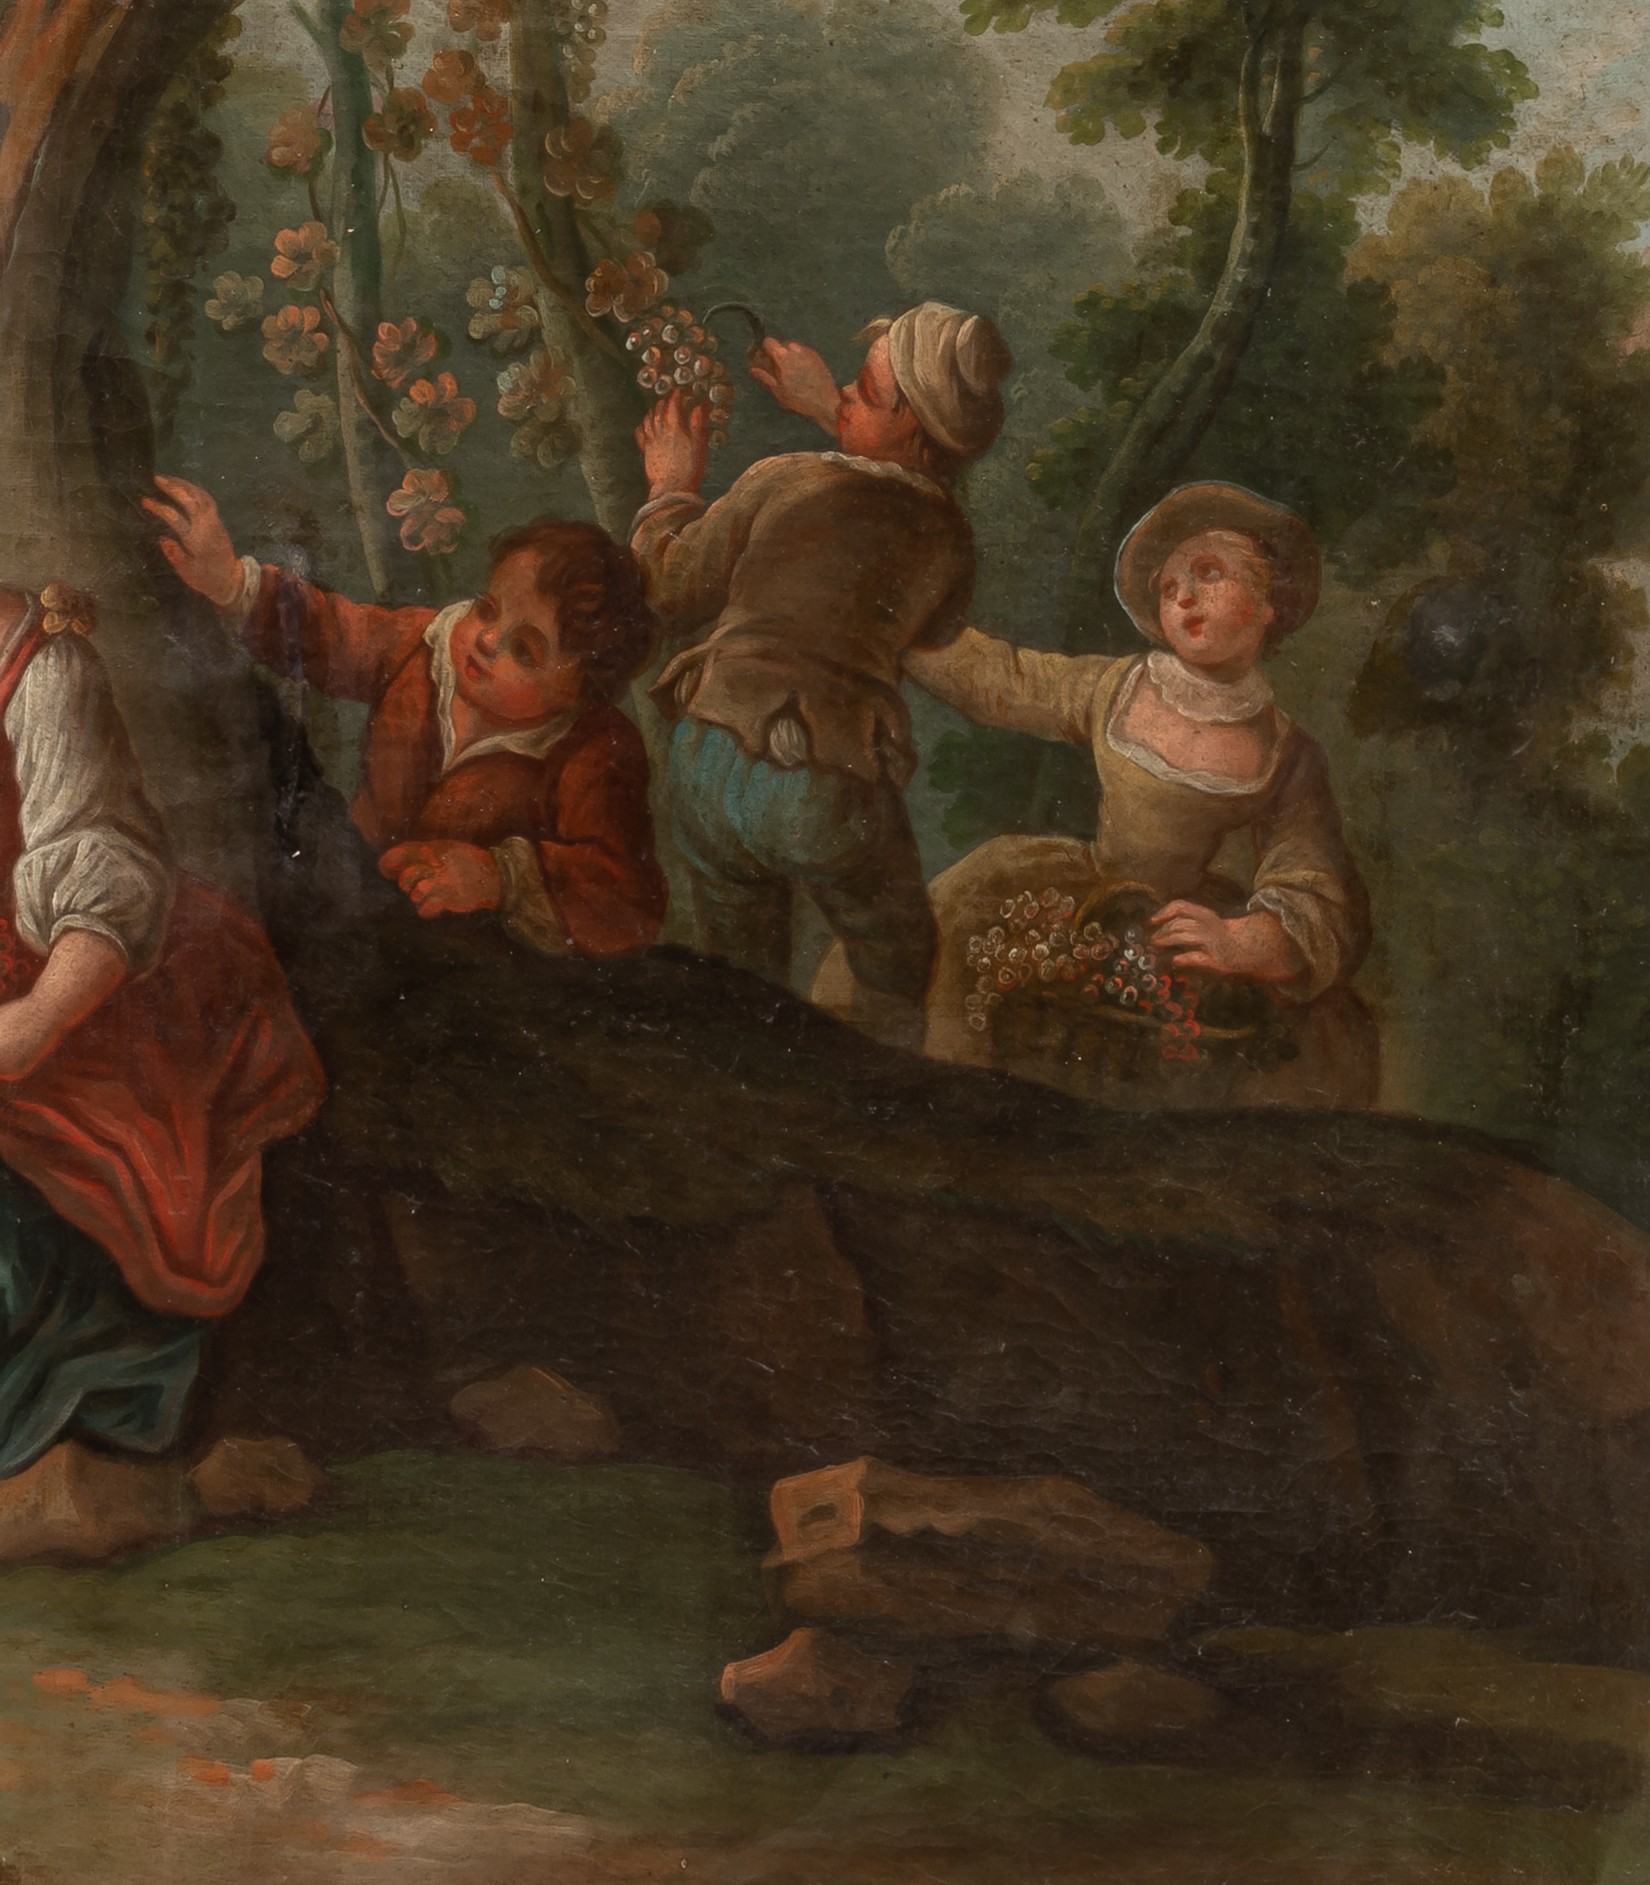 A pair of pendant paintings of gallant scenes in a garden setting, 18thC, oil on canvas, 78 x 91 cm - Image 10 of 12